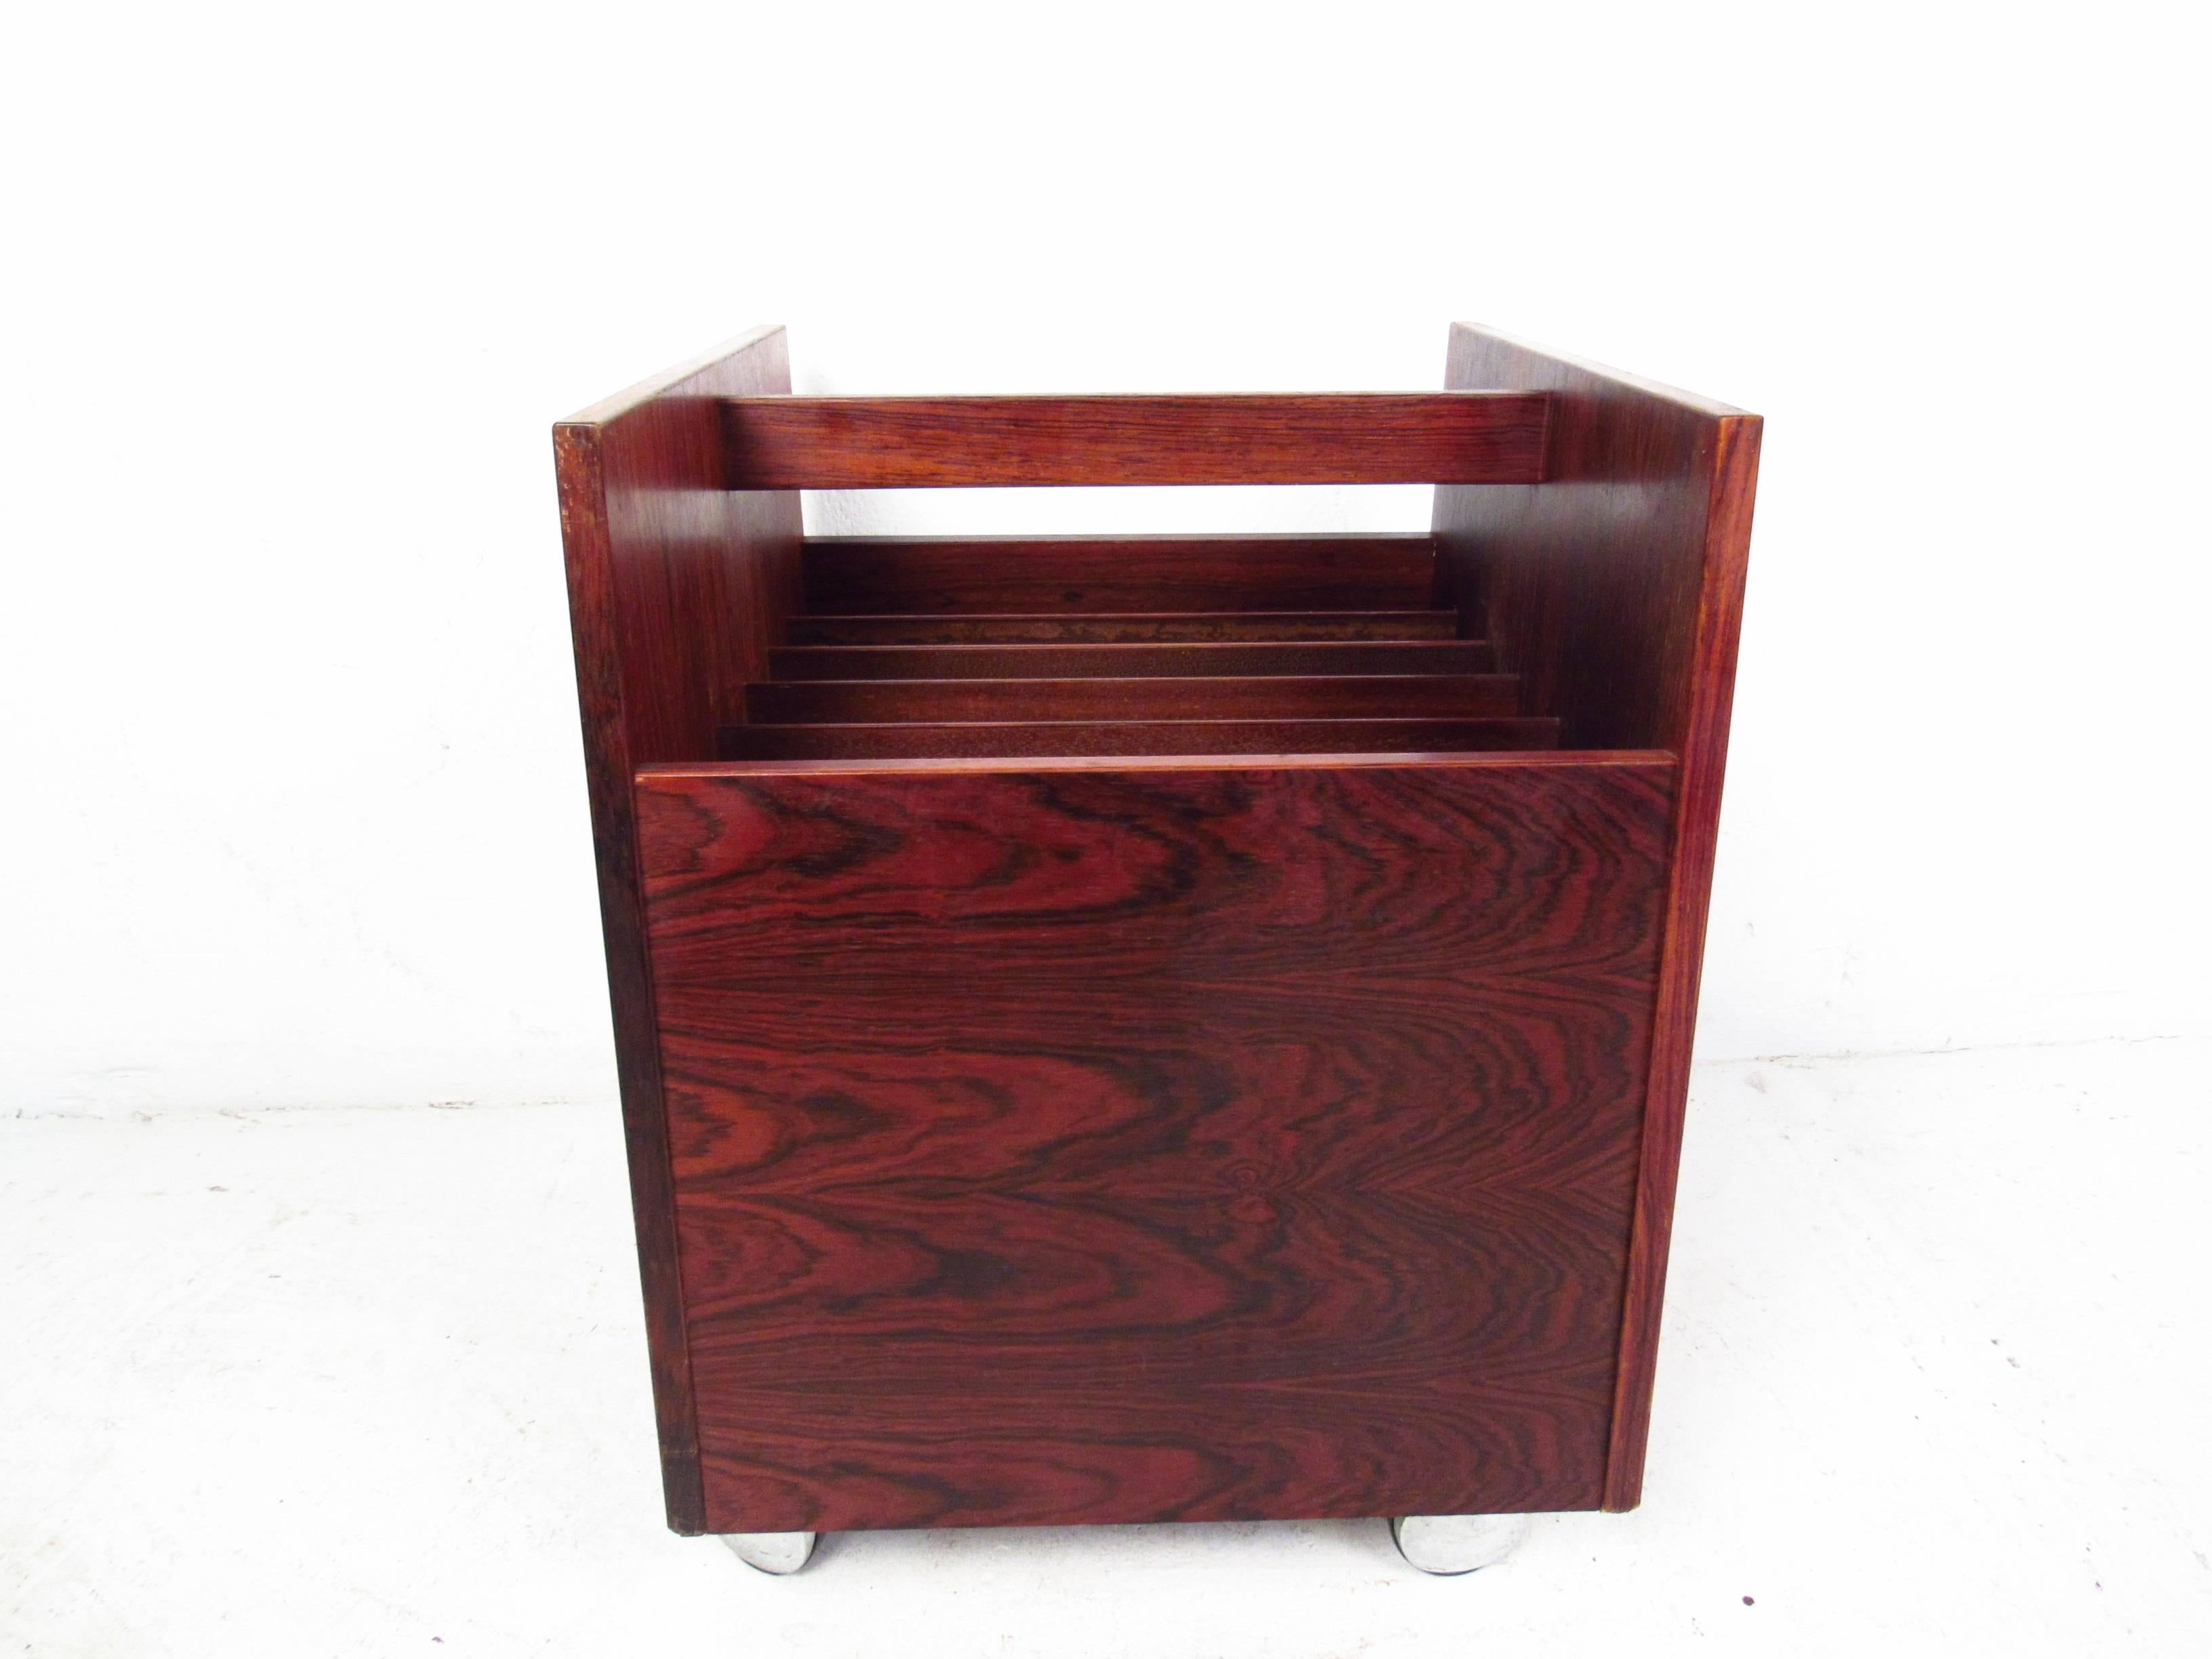 This beautiful midcentury rolling magazine cart has plenty of room for storage and organization. Quality craftsmanship shines through the unique rosewood finish, while the piece rests easily on sturdy casters. Please confirm item location (NY or